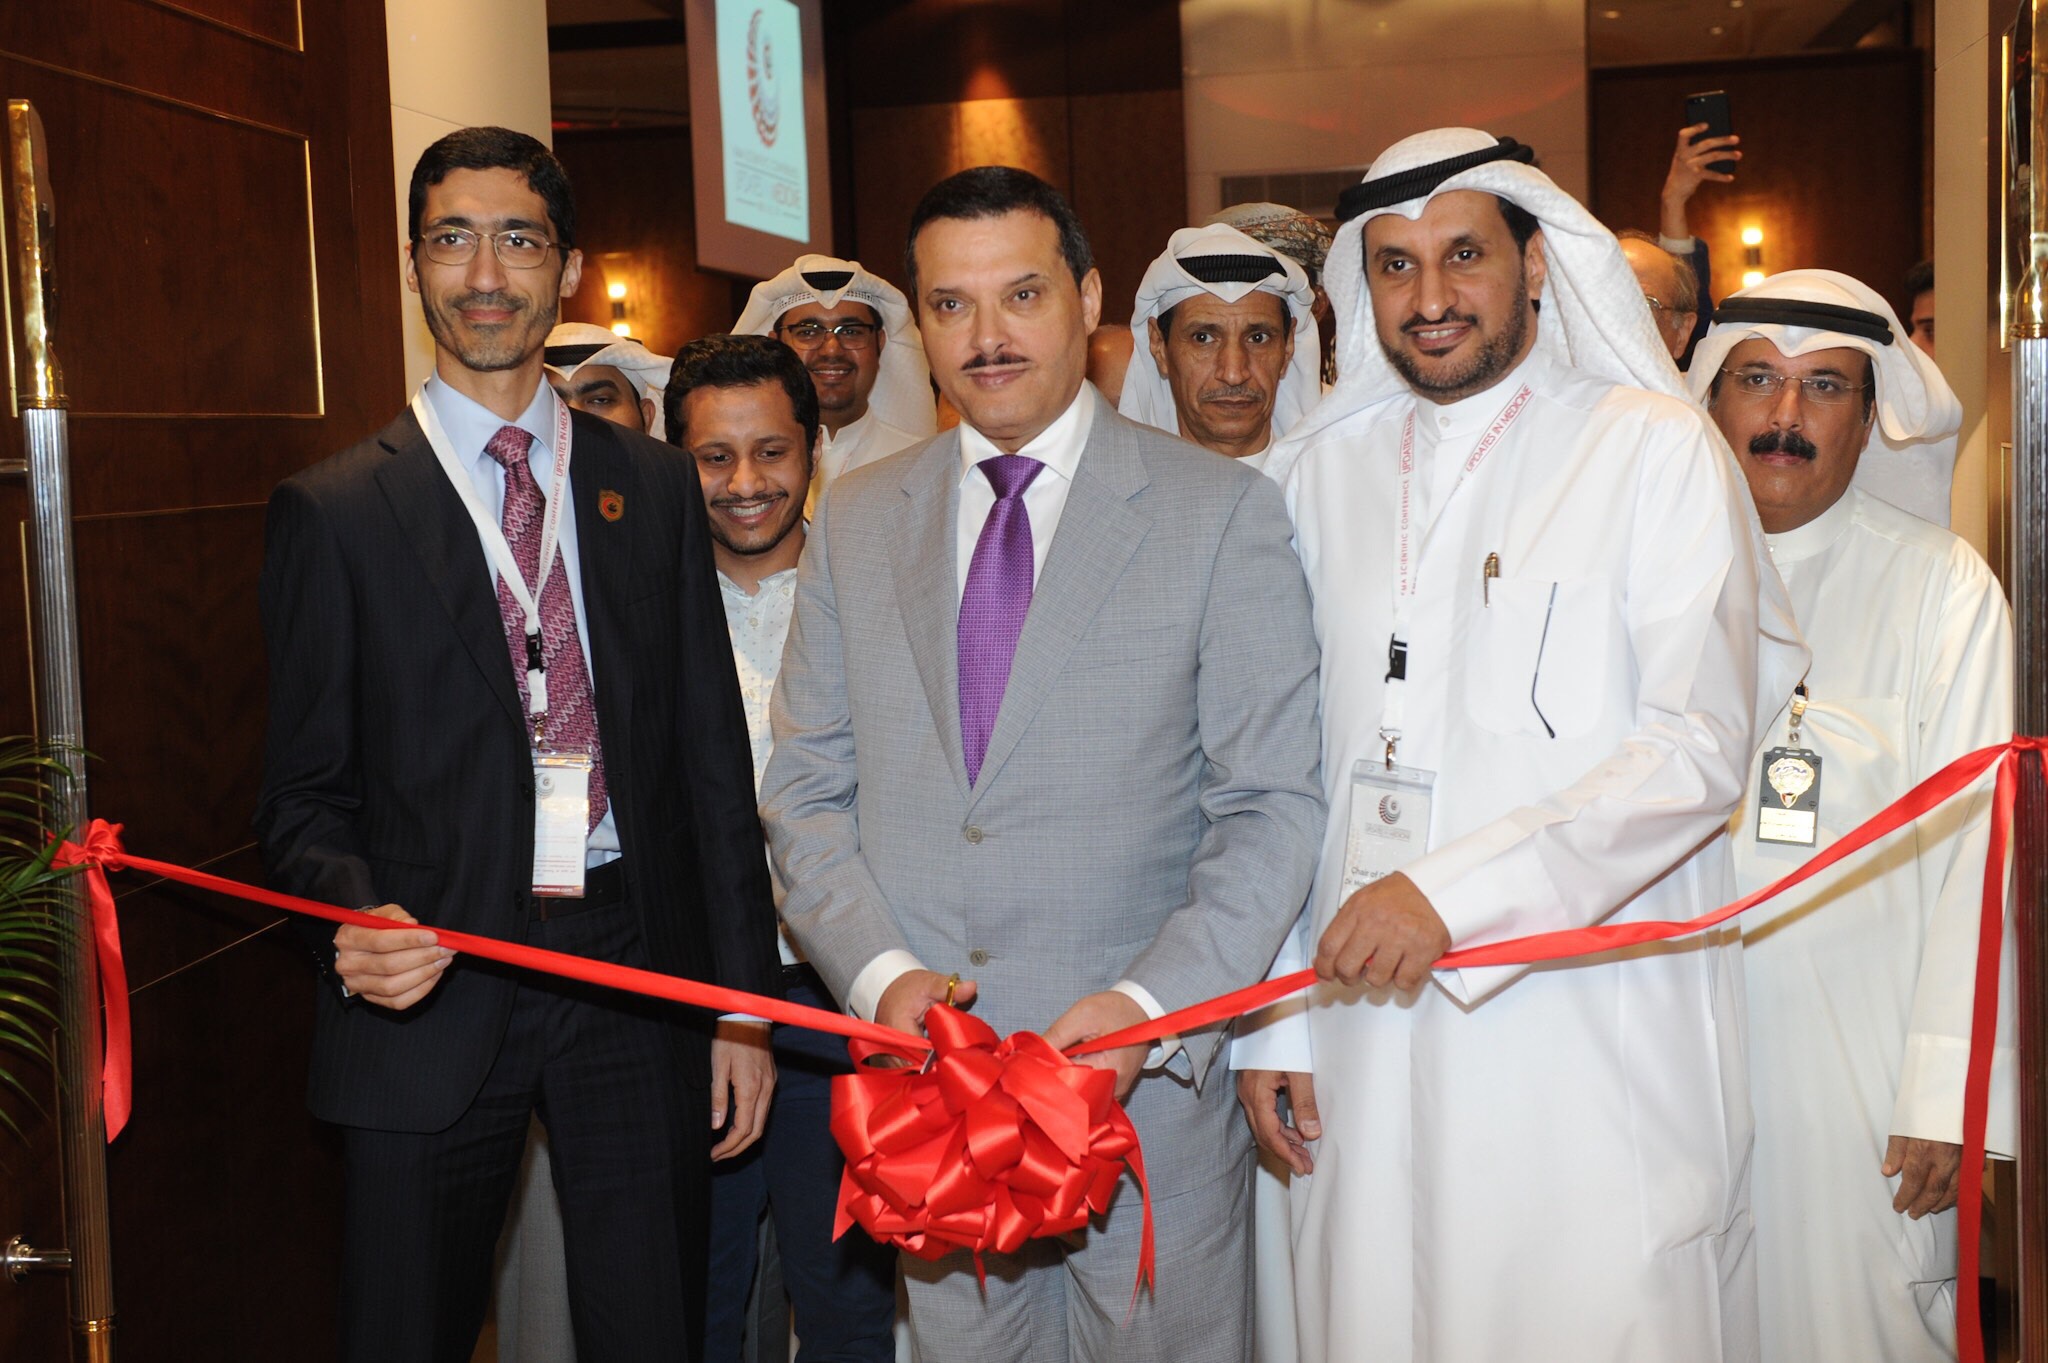 Minister of Health Dr. Jamal Al-Harbi inaugurates of an international scientific conference on "Updates in Medicine"